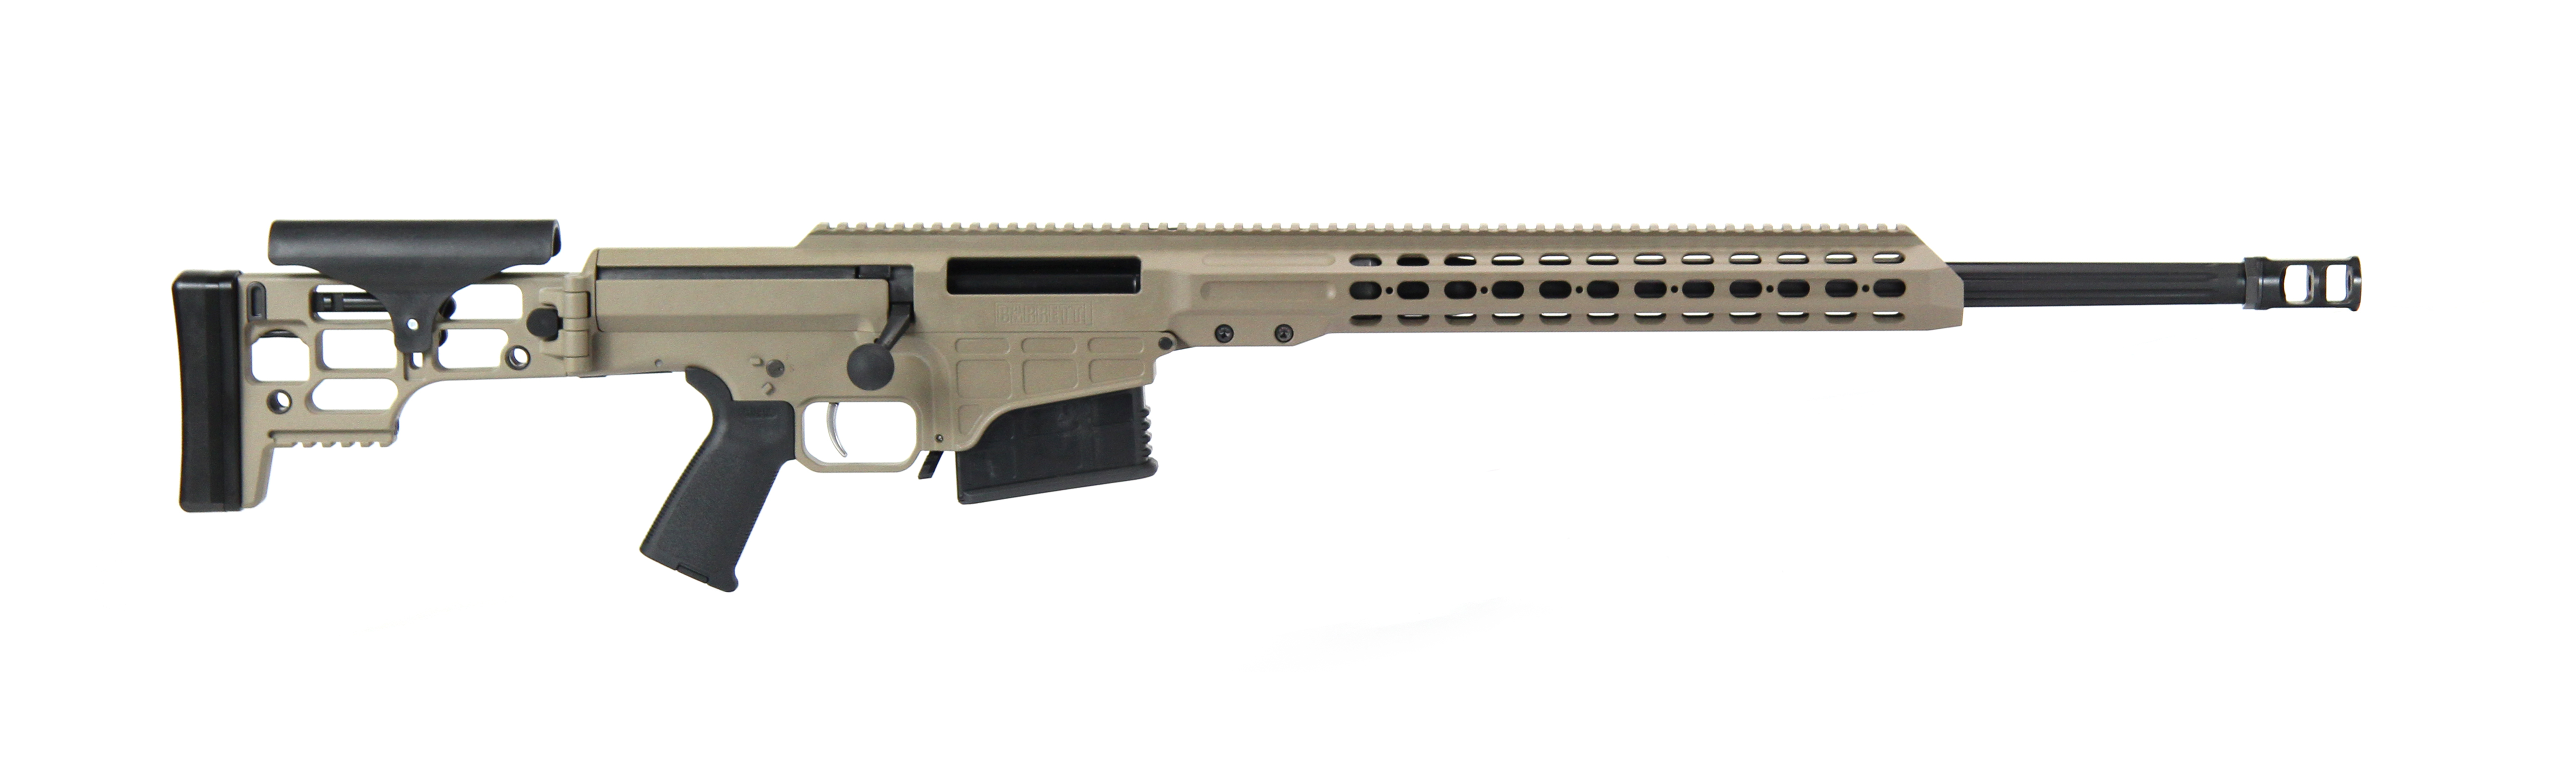 Special ops snipers will soon shoot this new rifle that can fire three  different calibers